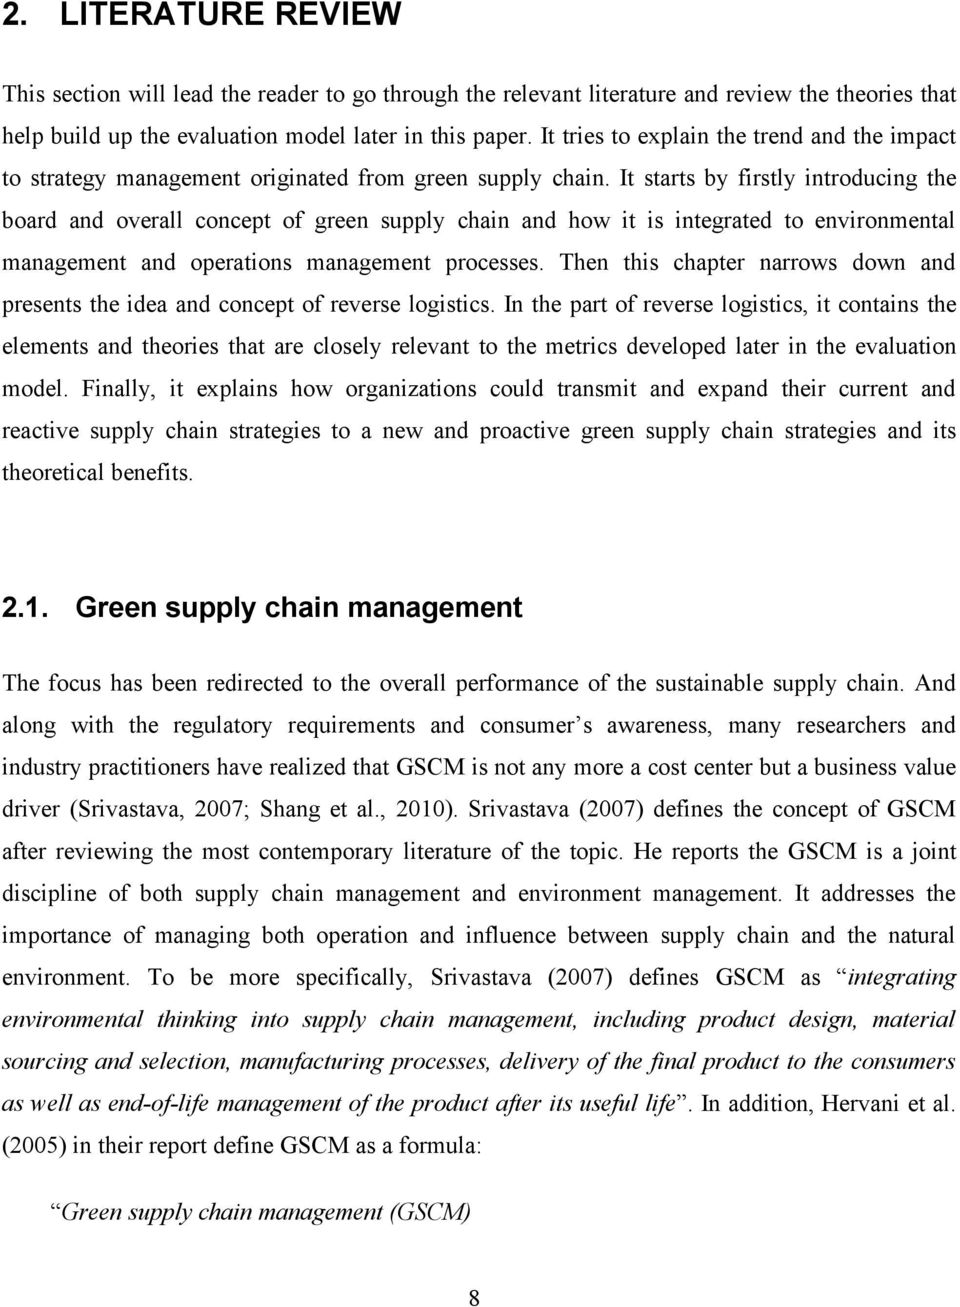 It starts by firstly introducing the board and overall concept of green supply chain and how it is integrated to environmental management and operations management processes.